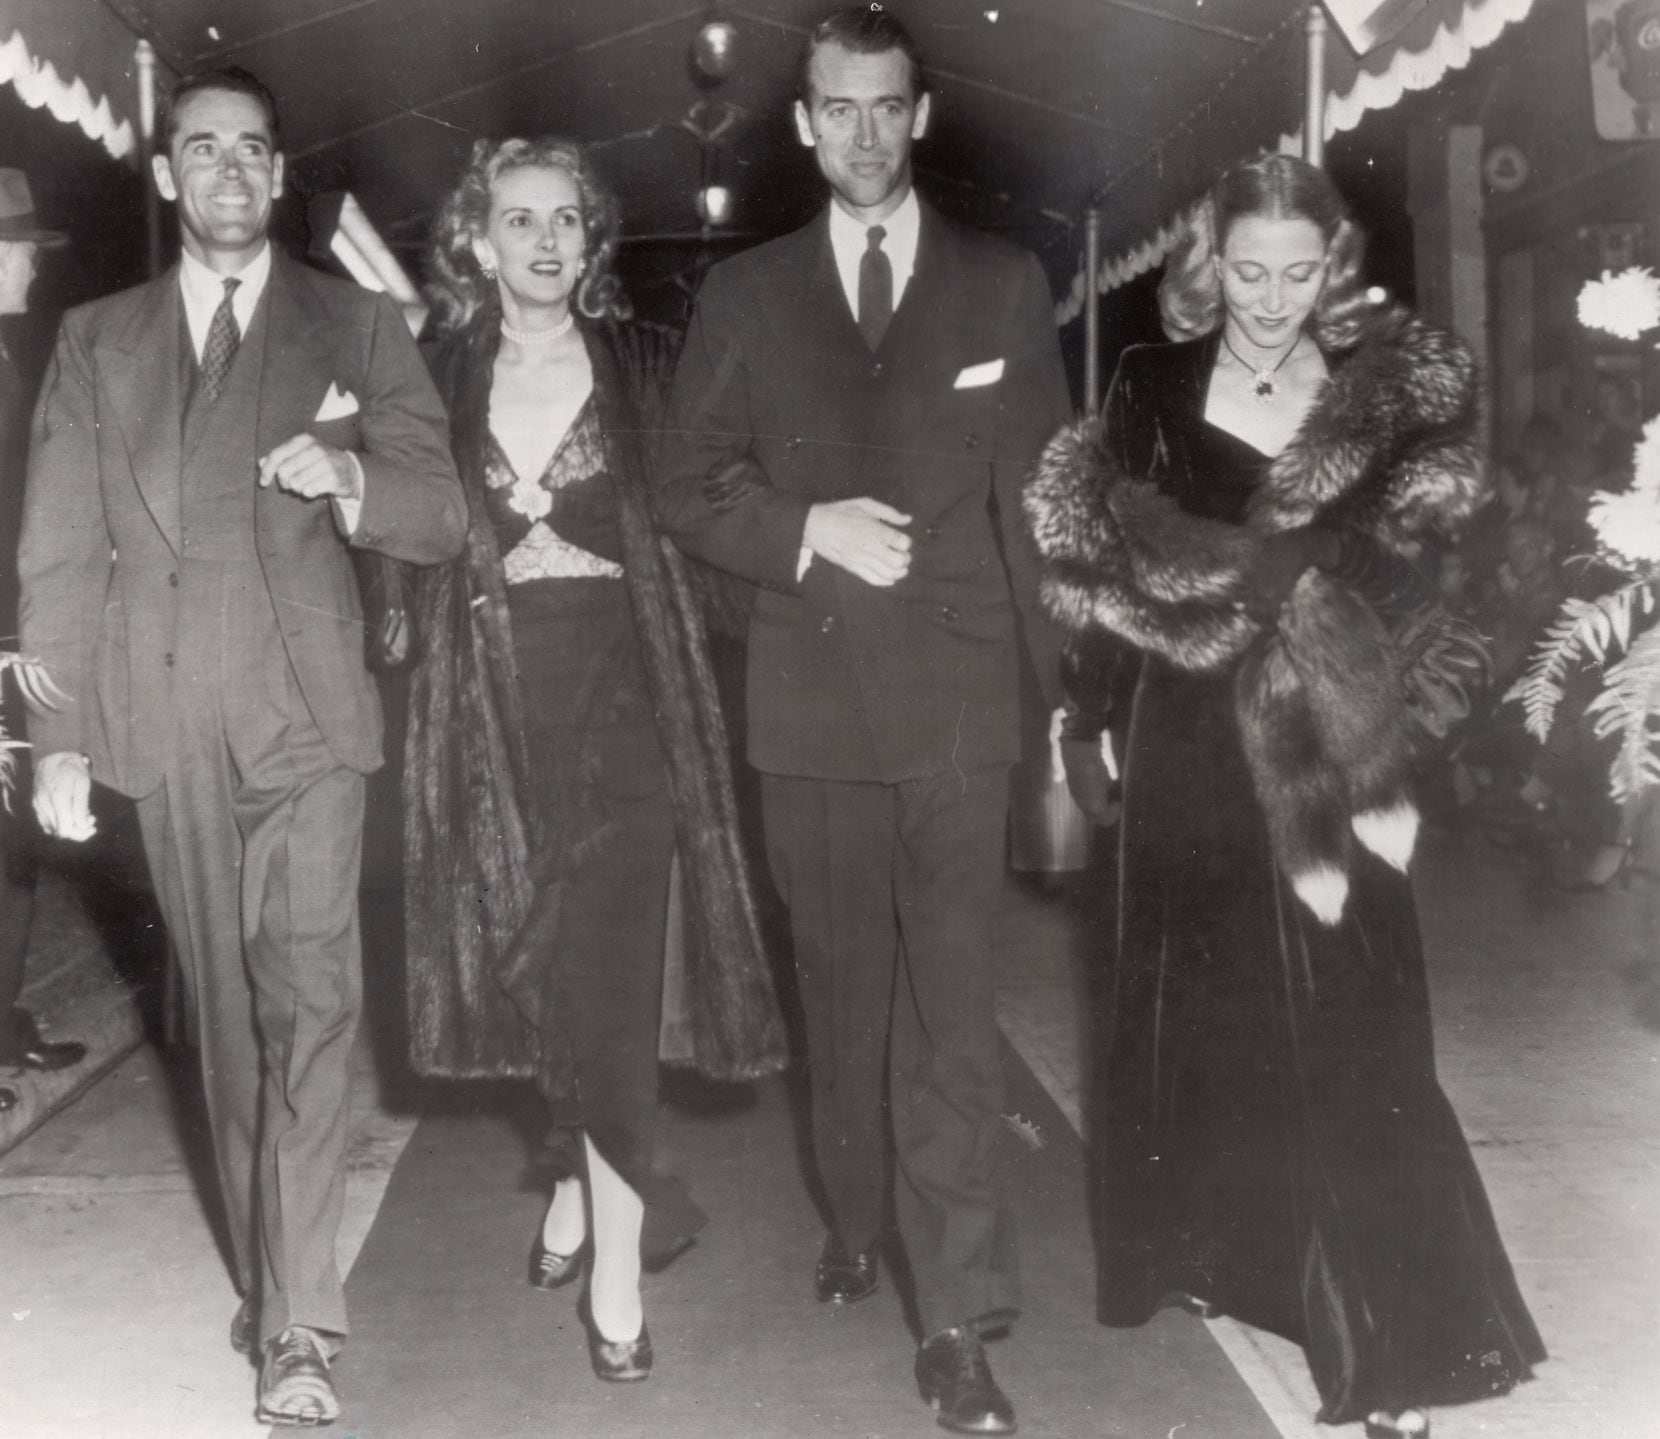 Henry Fonda, model Anita Colby James Stewart and Fonda's wife  Frances Ford Fonda,  attend the premiere of Alfred Hitchcock's Spellbound in 1945.  